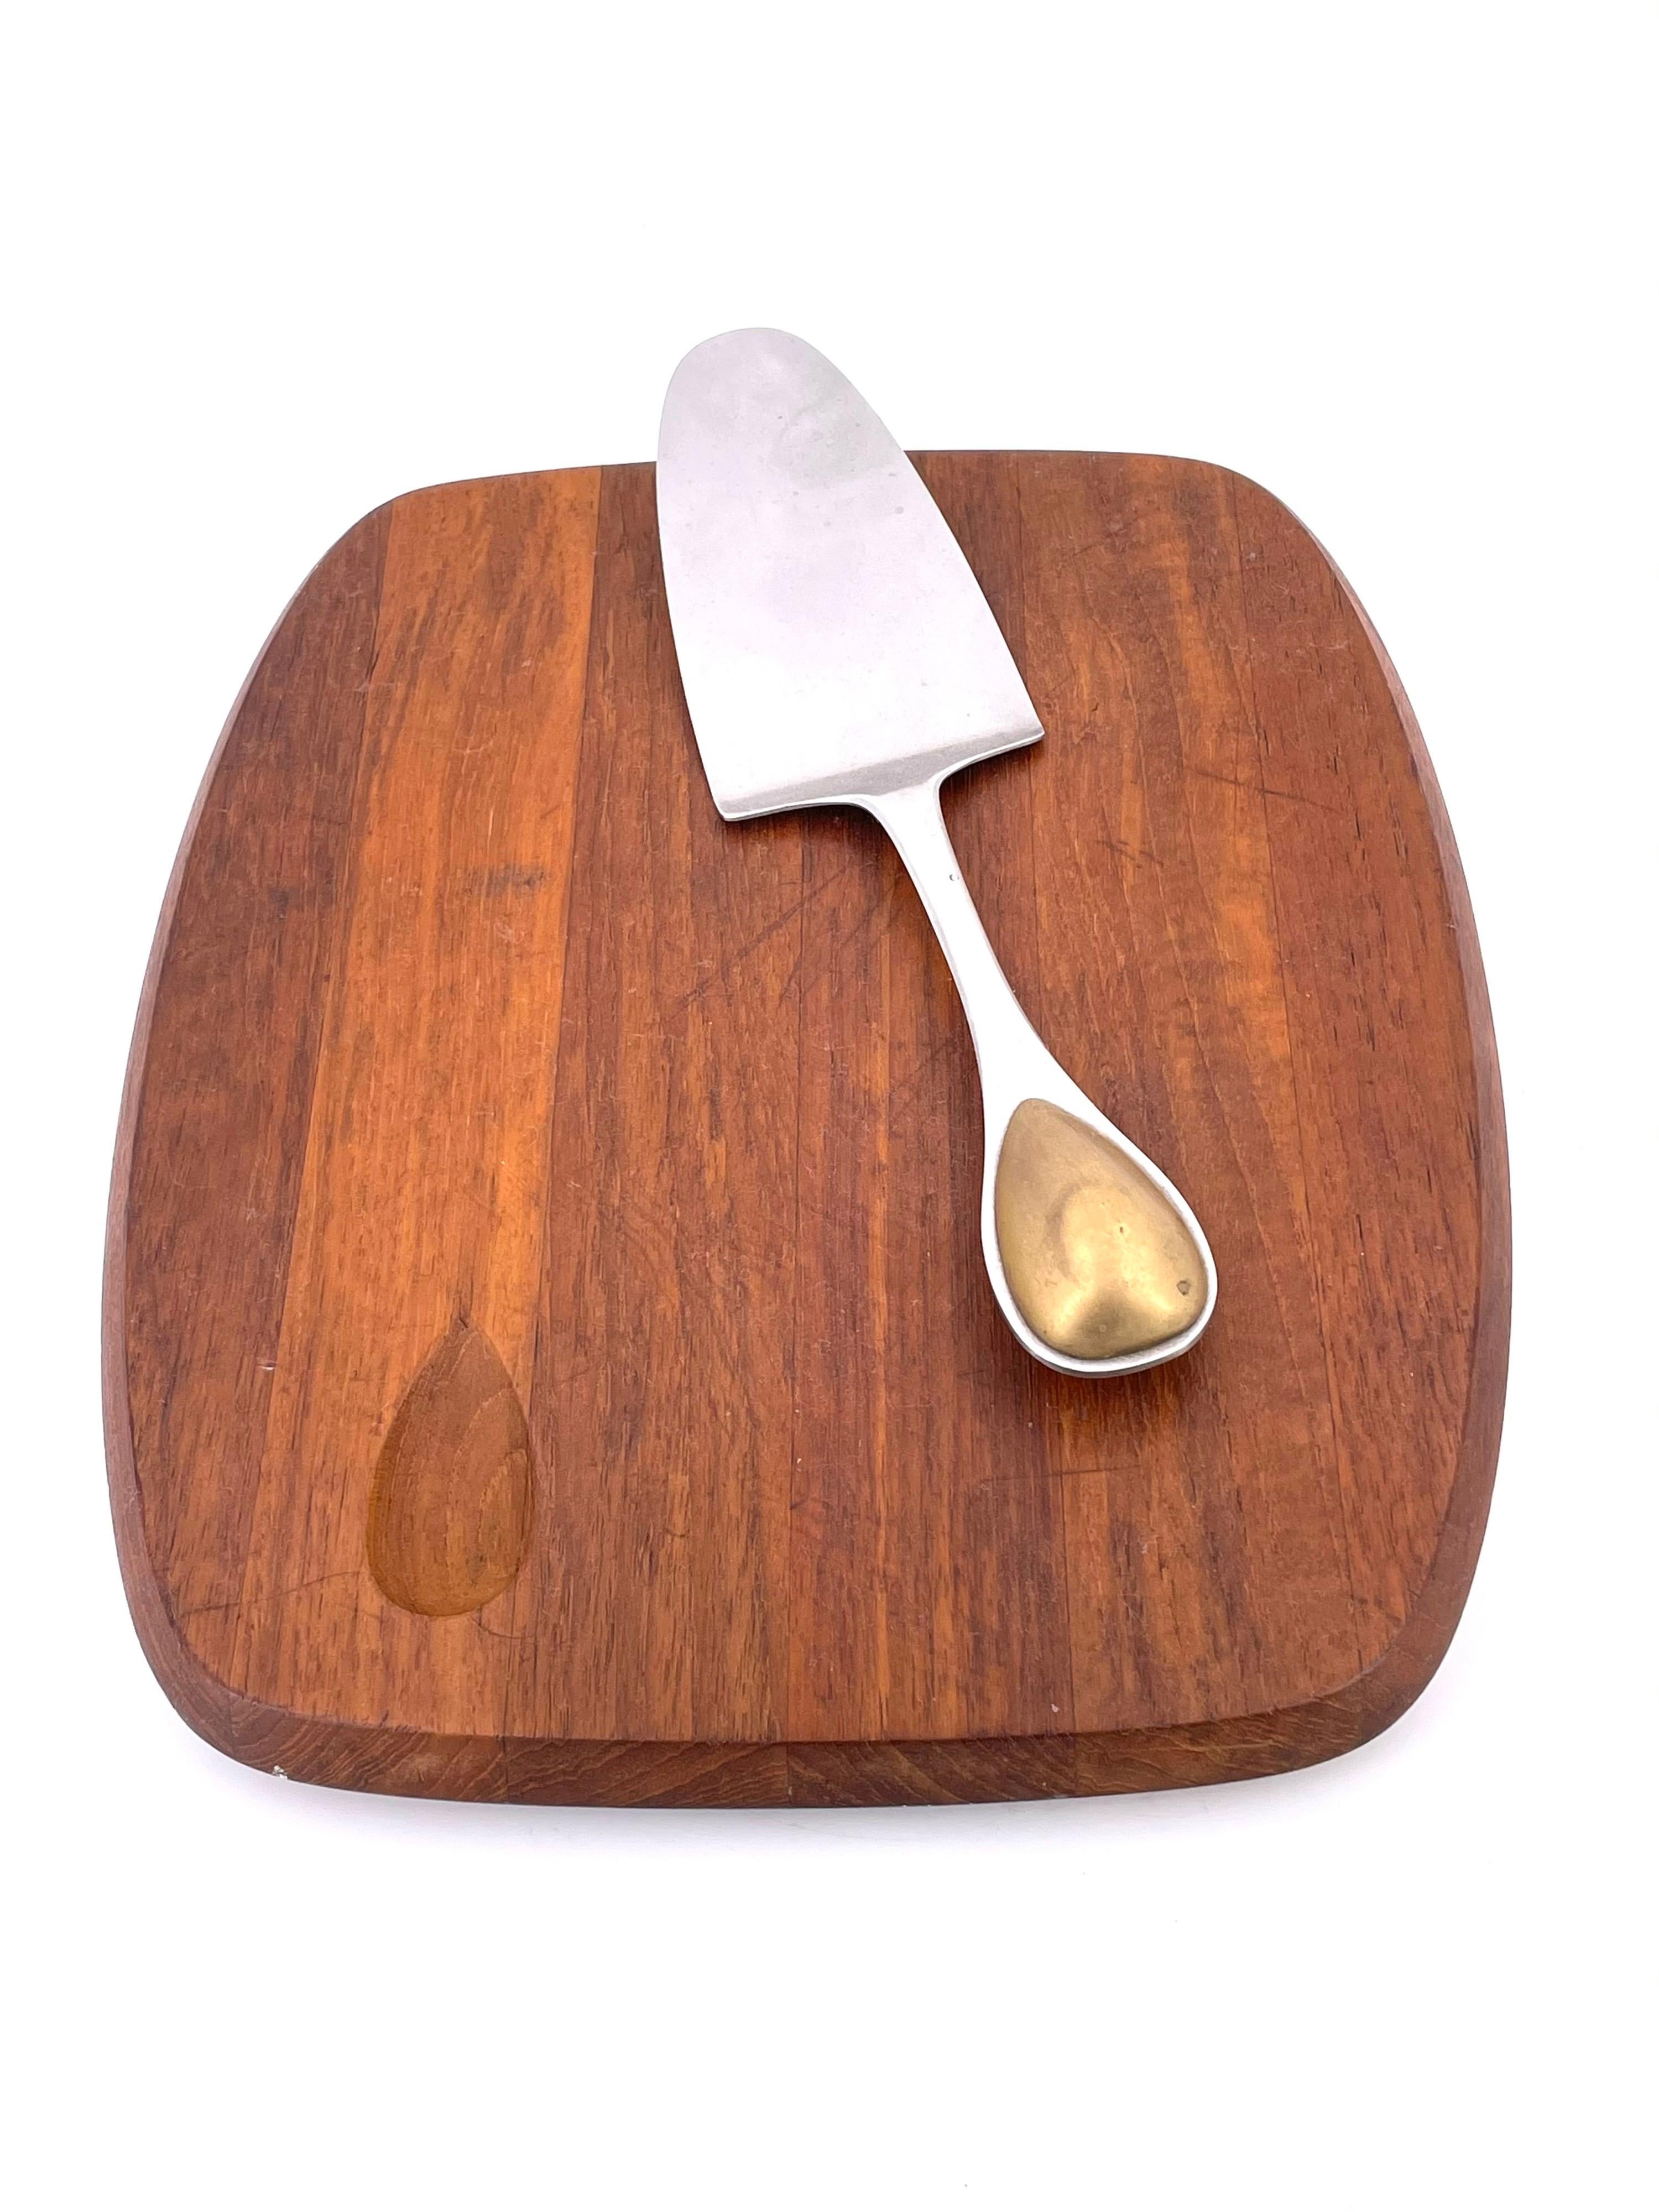 Danish Staved Teak Cheese Board with Cutter by Vivianna Torun for Dansk For Sale